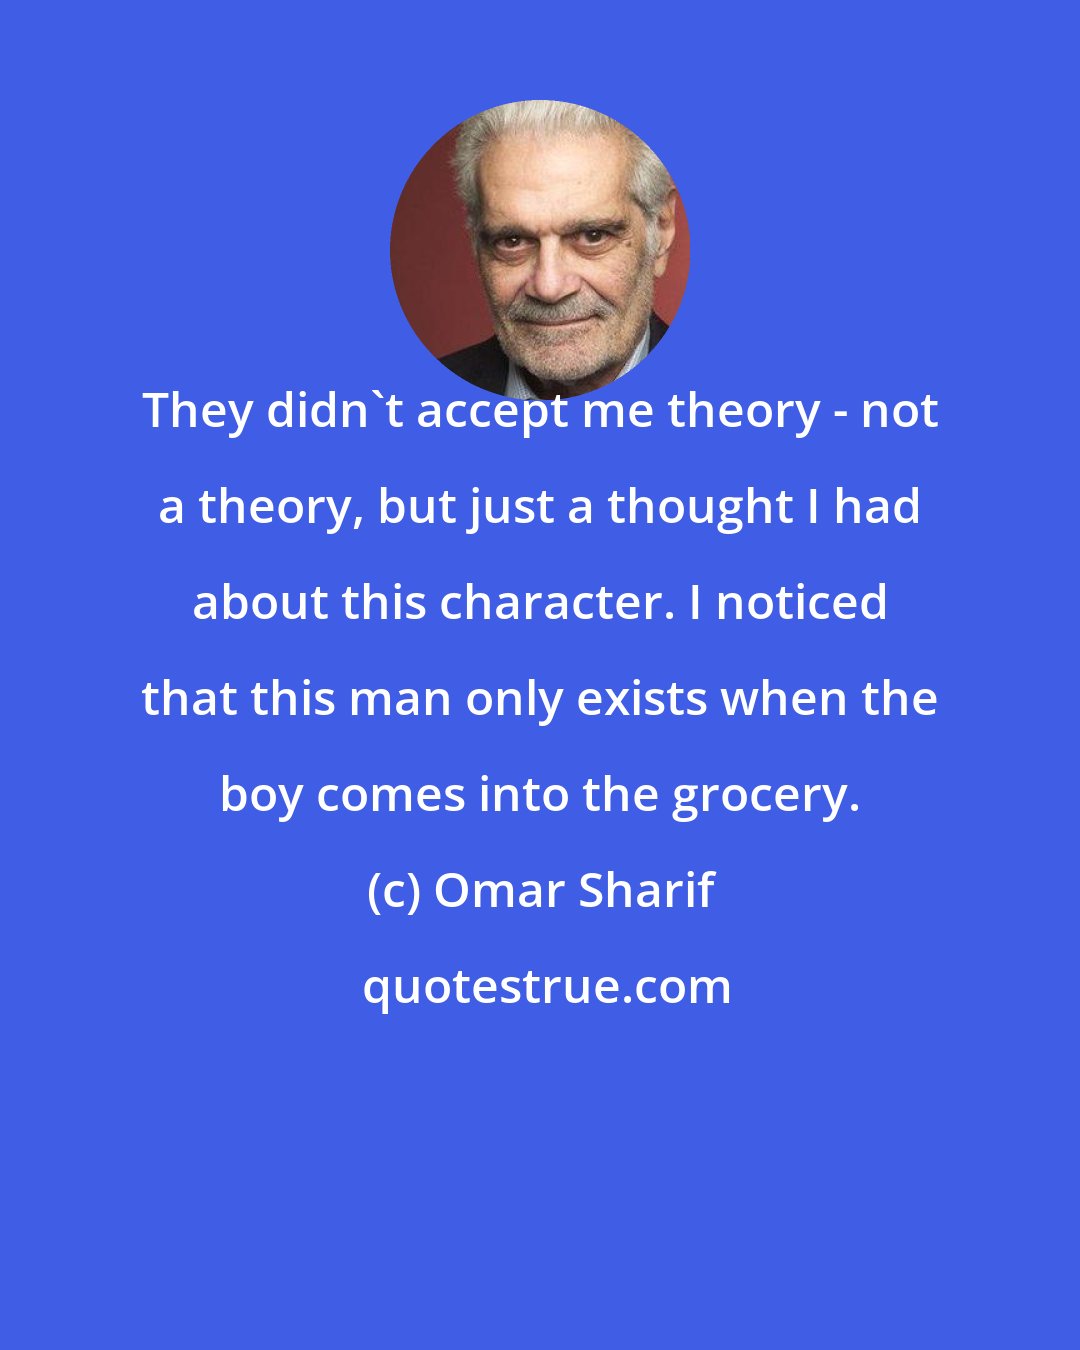 Omar Sharif: They didn't accept me theory - not a theory, but just a thought I had about this character. I noticed that this man only exists when the boy comes into the grocery.